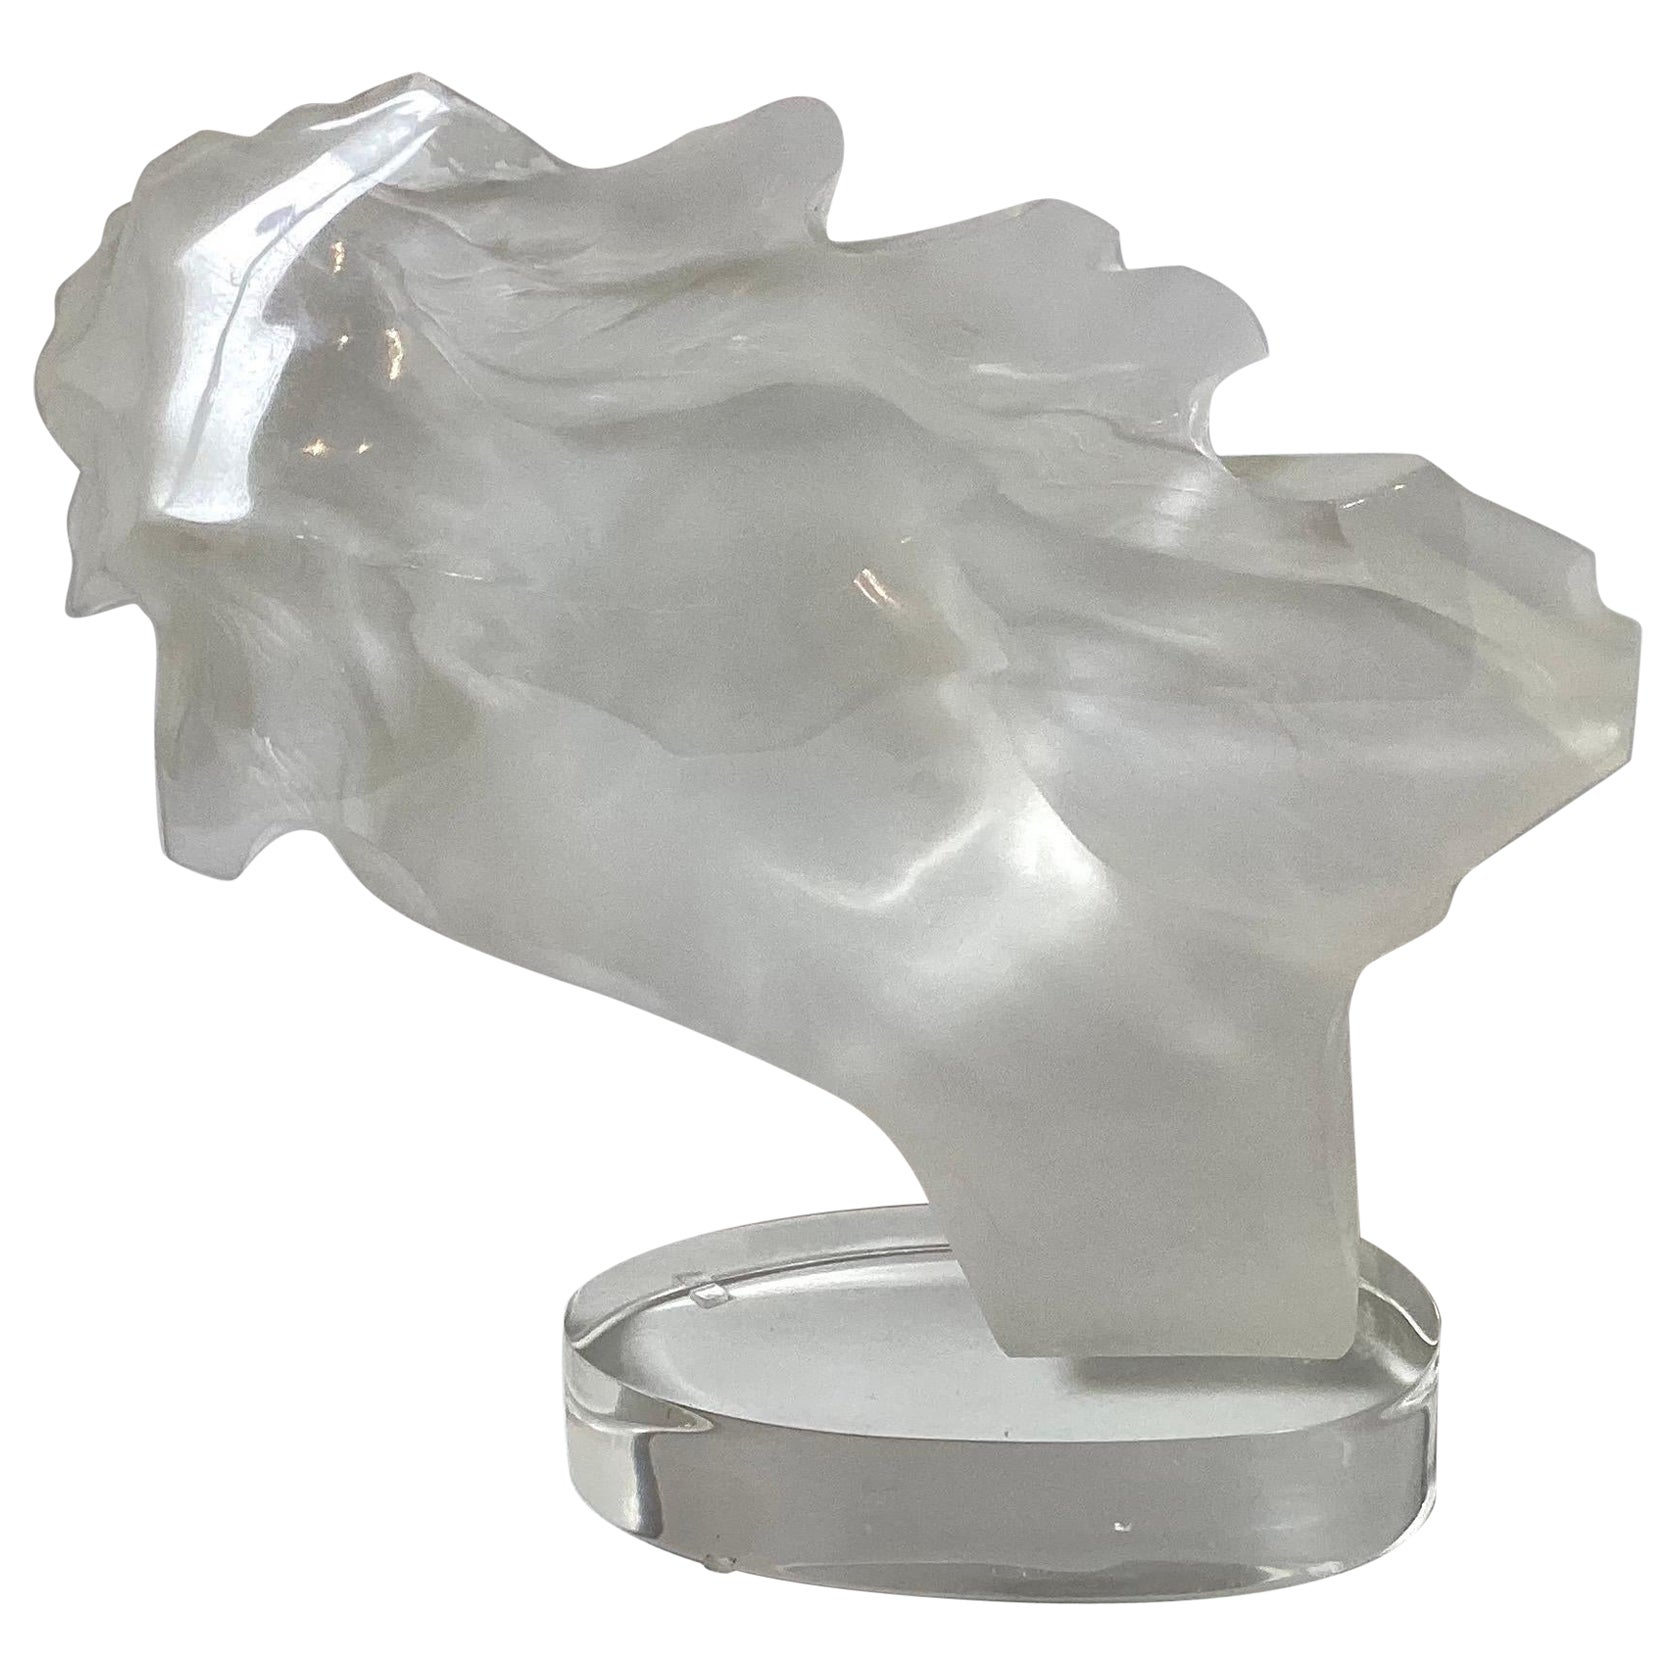 Acrylic Sculpture by Frederic Hart Titled "Firebird" For Sale